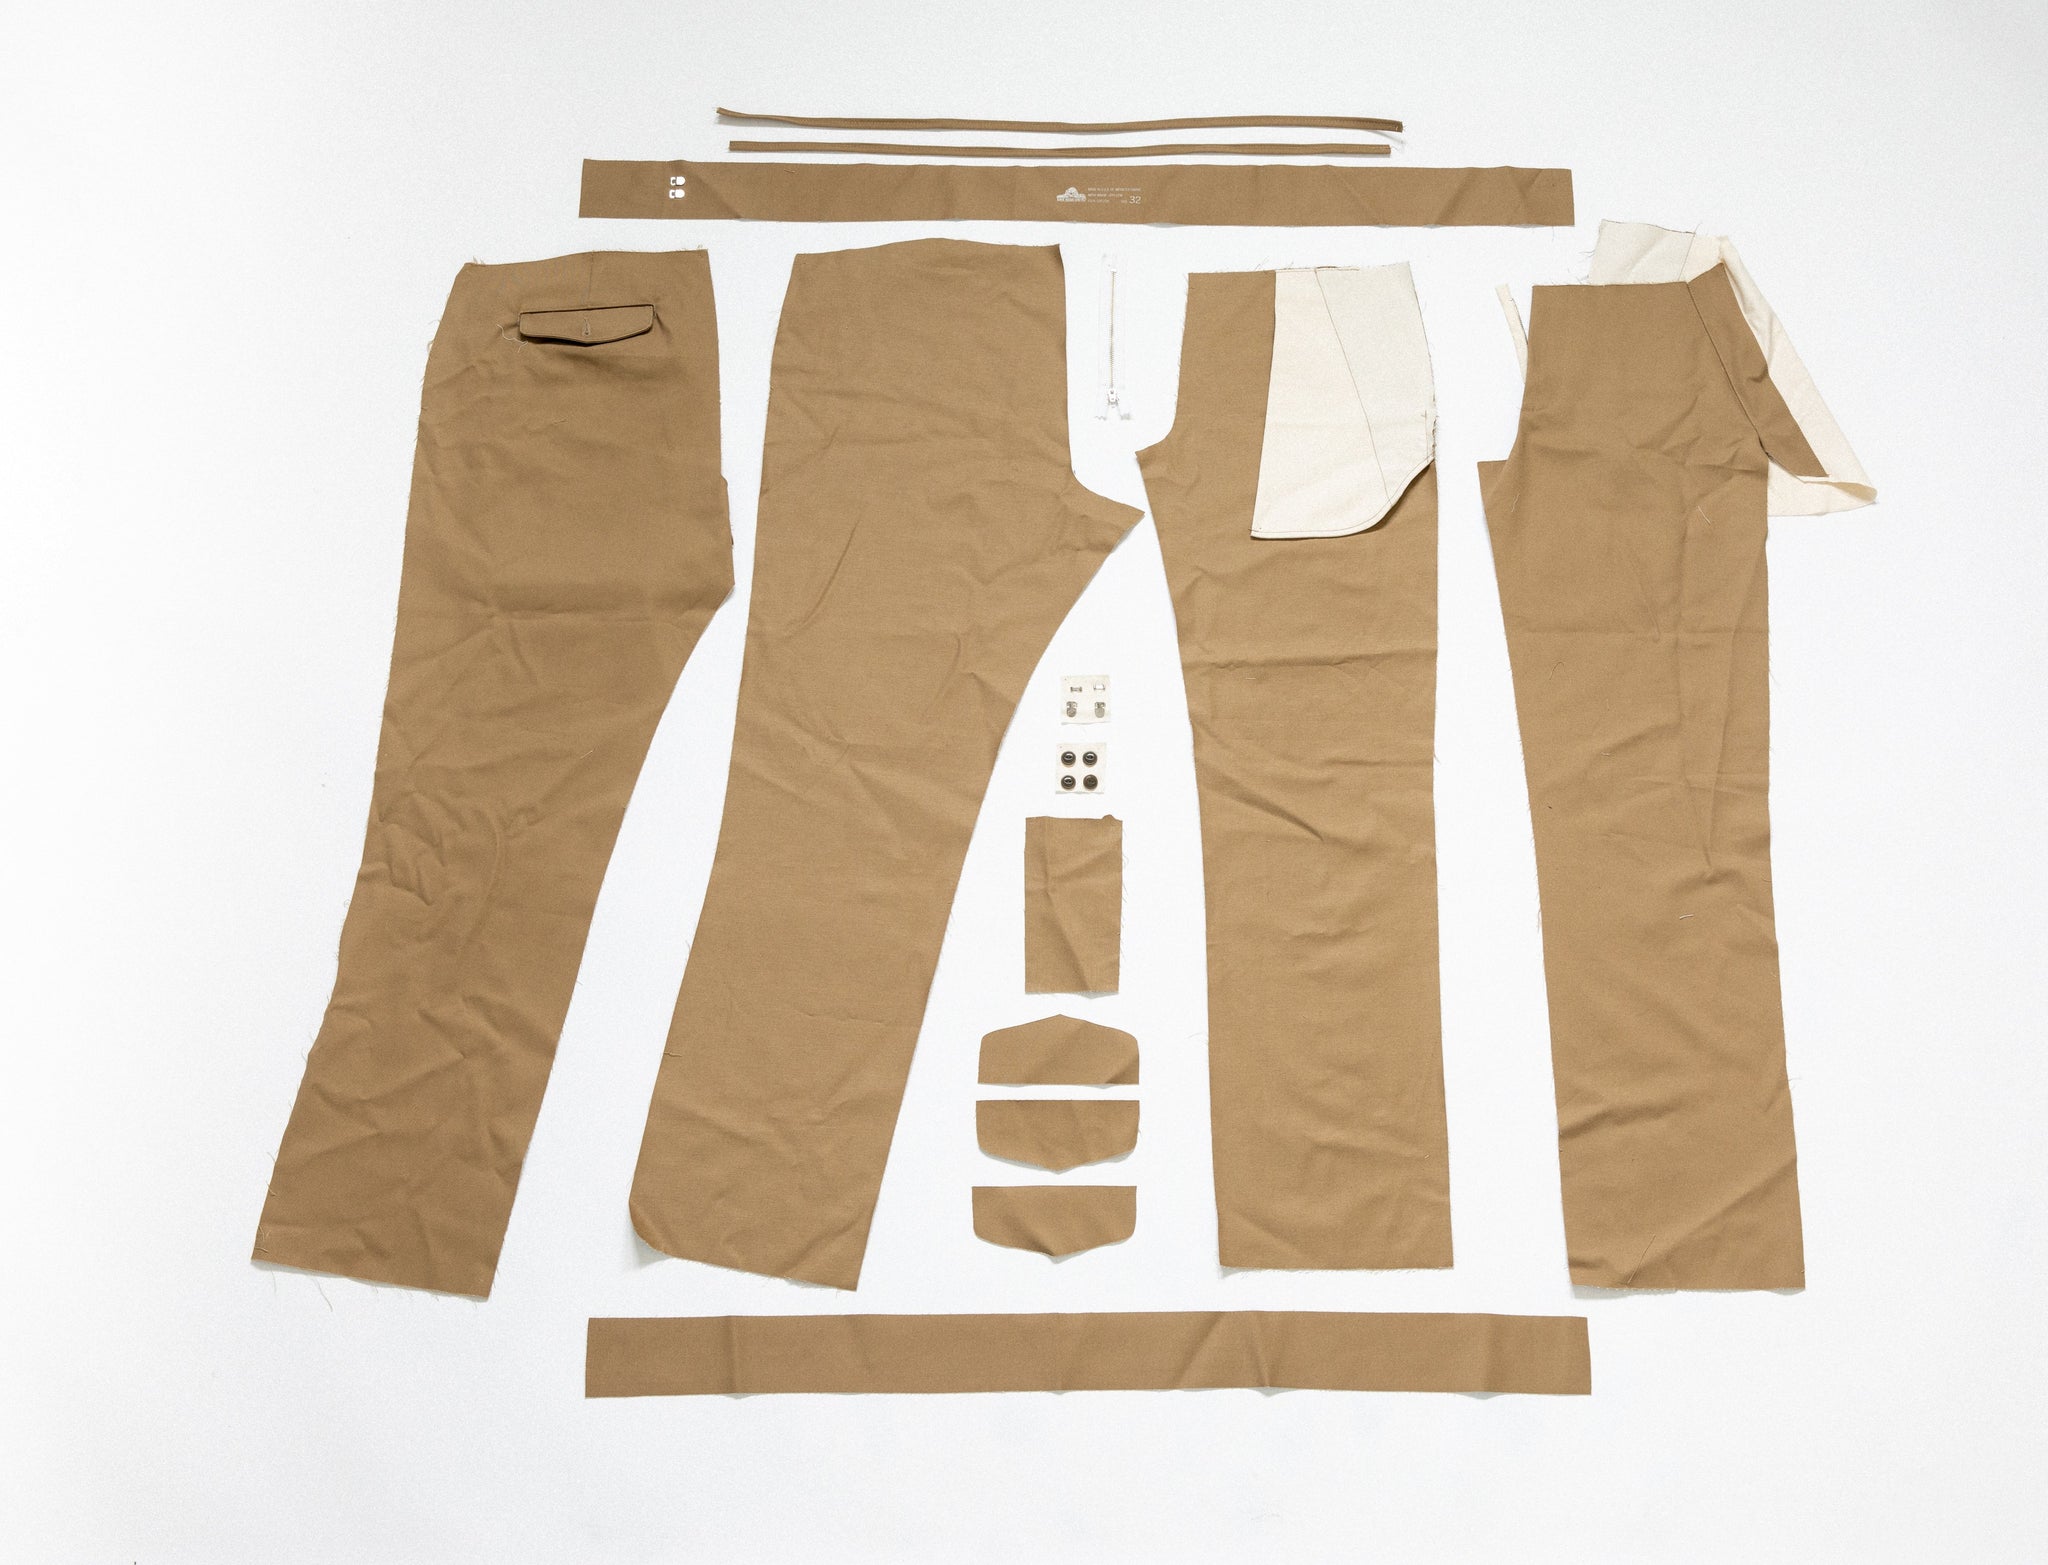 THE DECONSTRUCTED CHINO<h4 class="blog__title-sub">SUM OF ITS PARTS</h4>